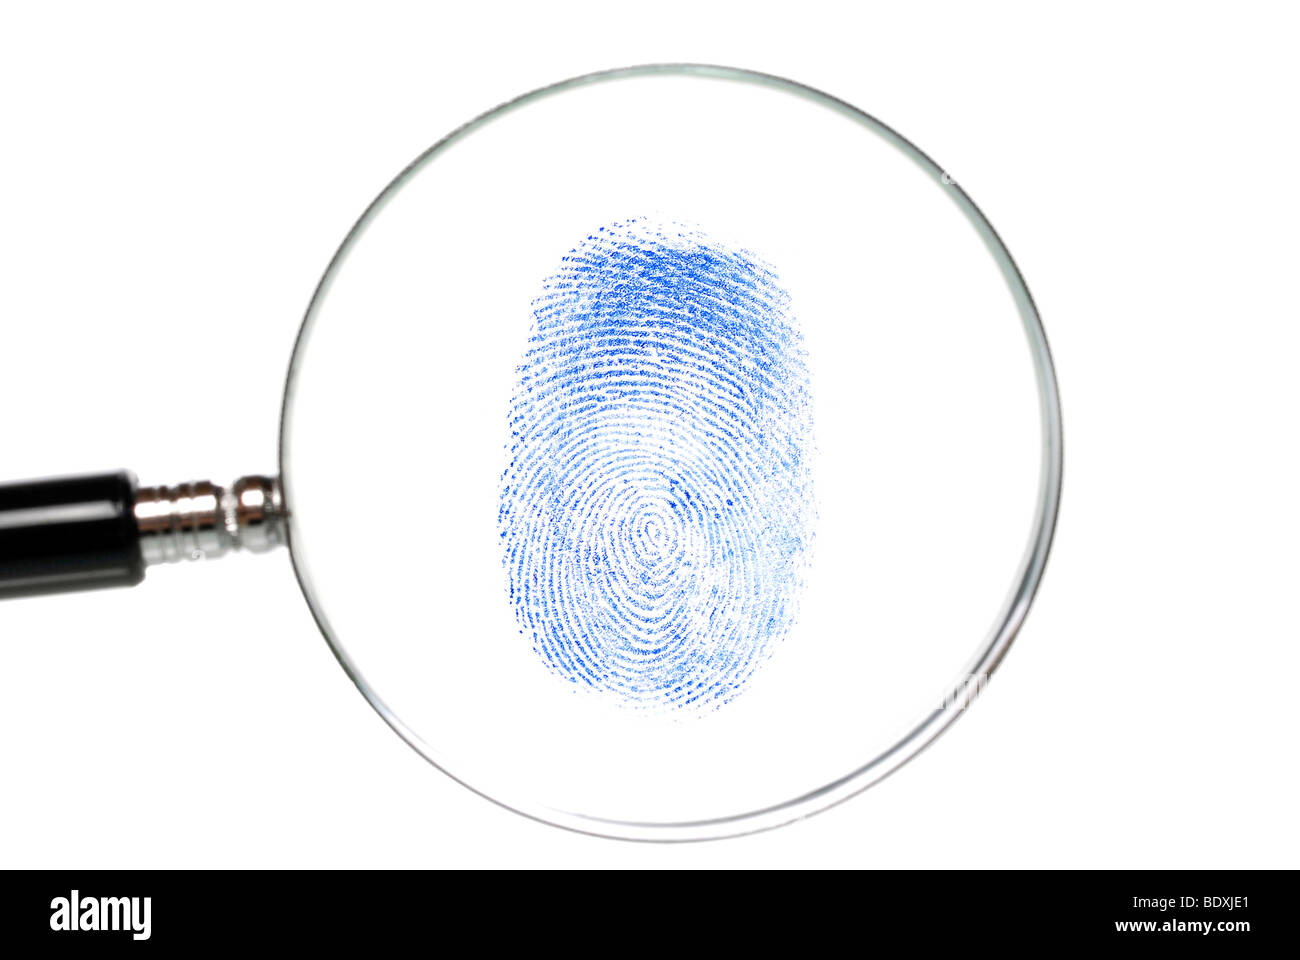 Magnifying glass with fingerprint, symbolic image for data privacy, forensics Stock Photo